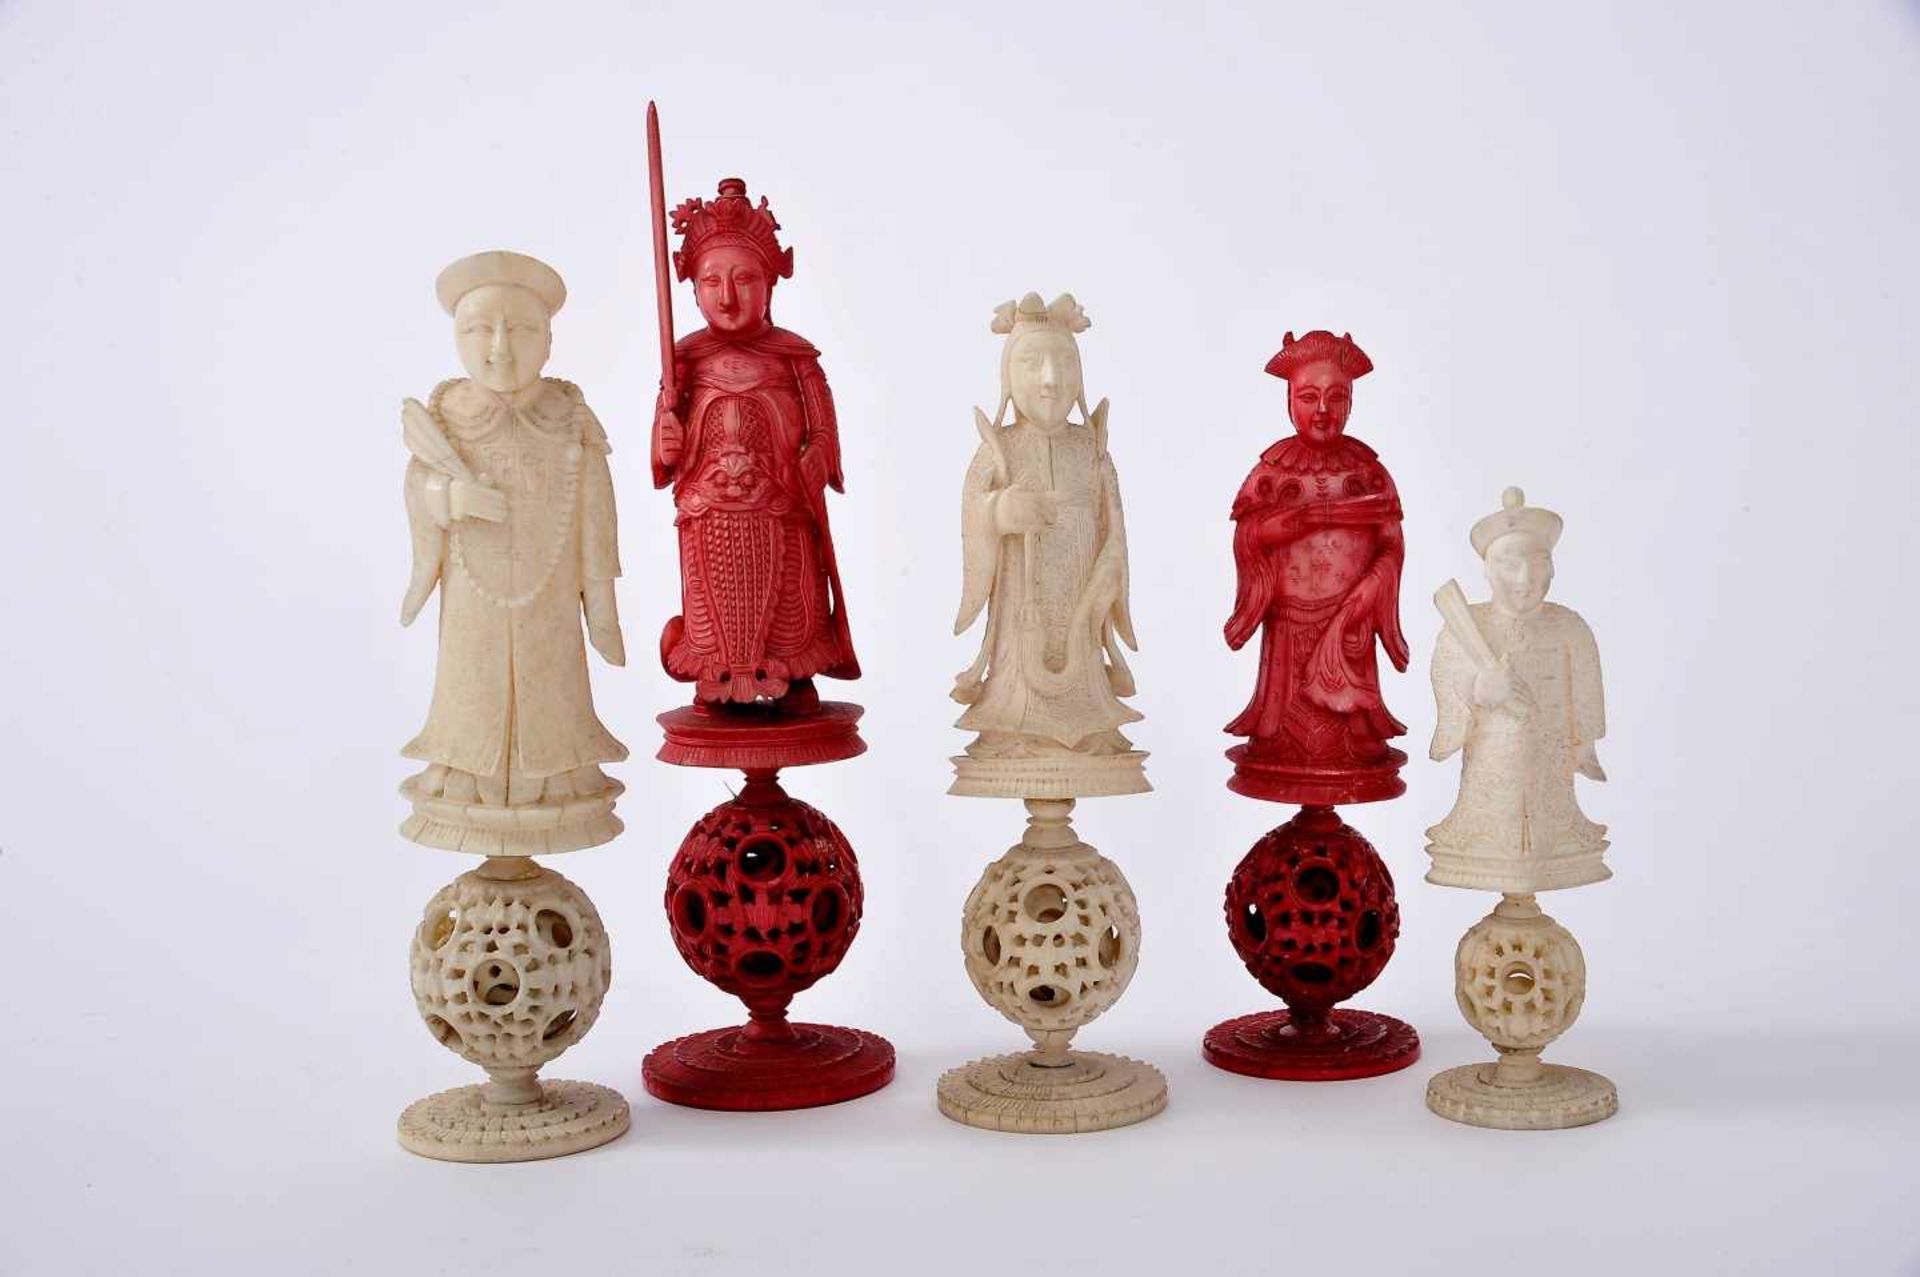 Chess PiecesChess Pieces, carved ivory with all the pieces based on "Ball of happiness", one of - Image 5 of 5